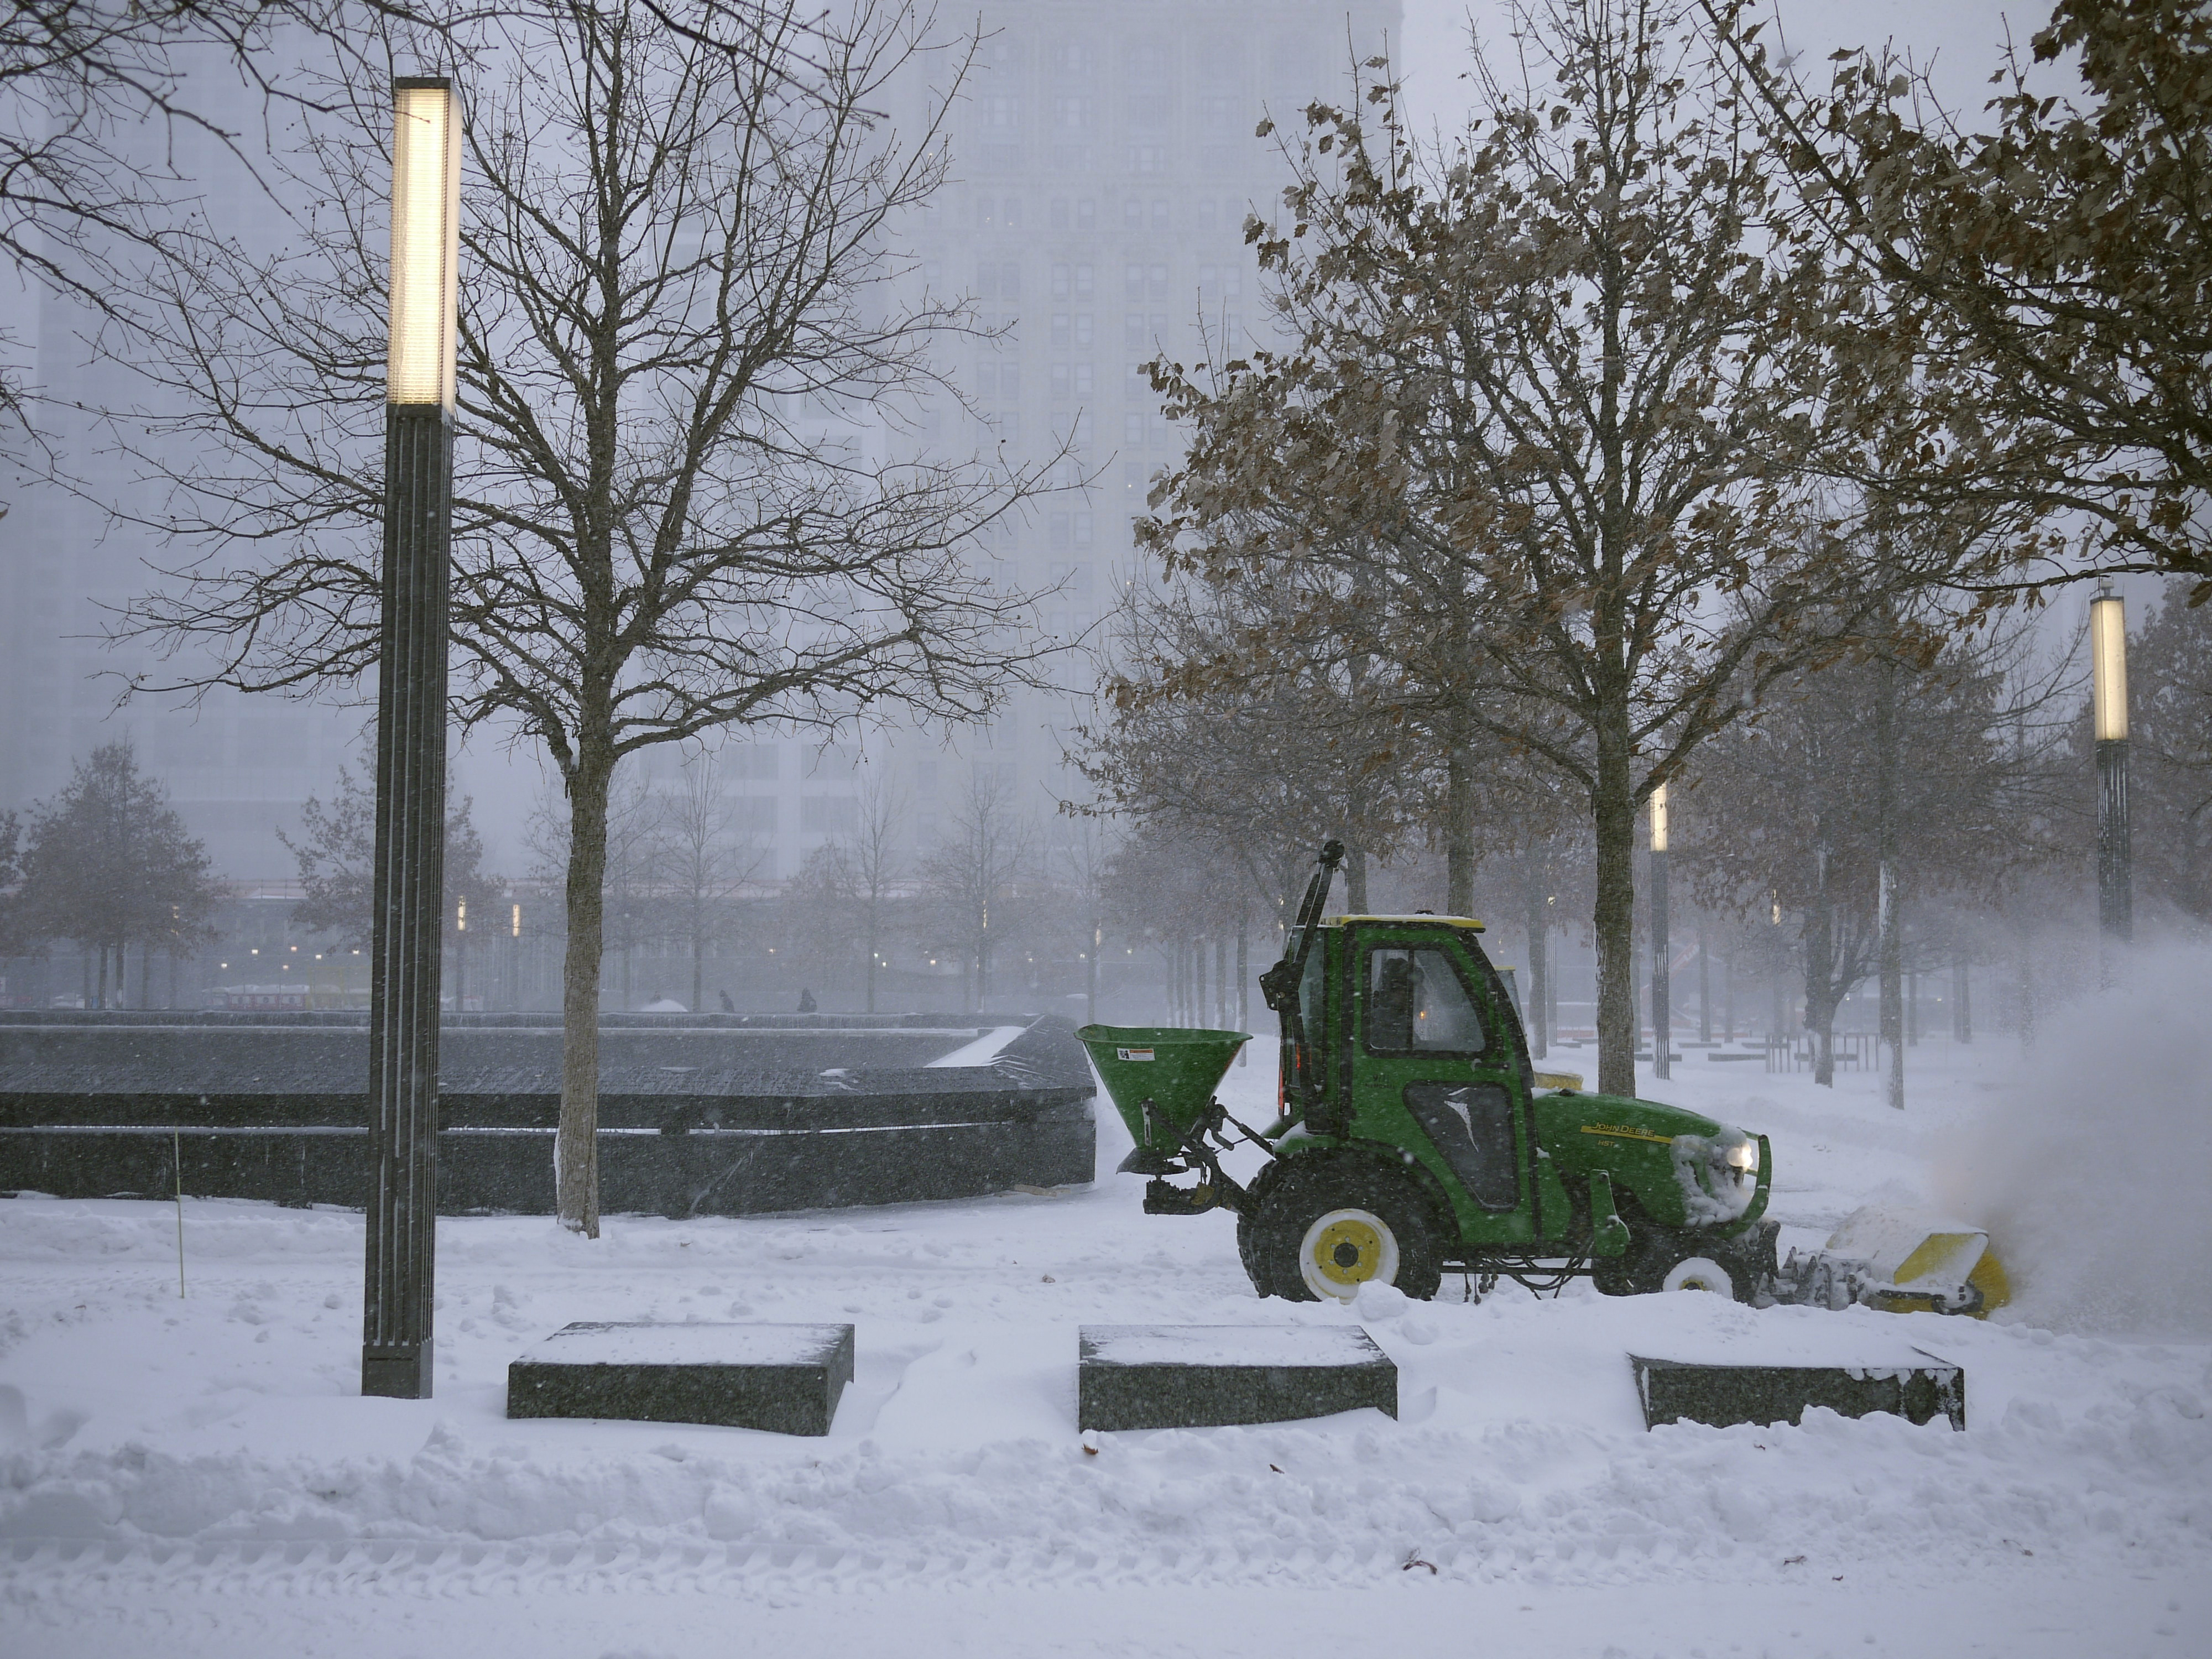 A man driving a green plow clears snow from the 9/11 Memorial during a snowstorm.